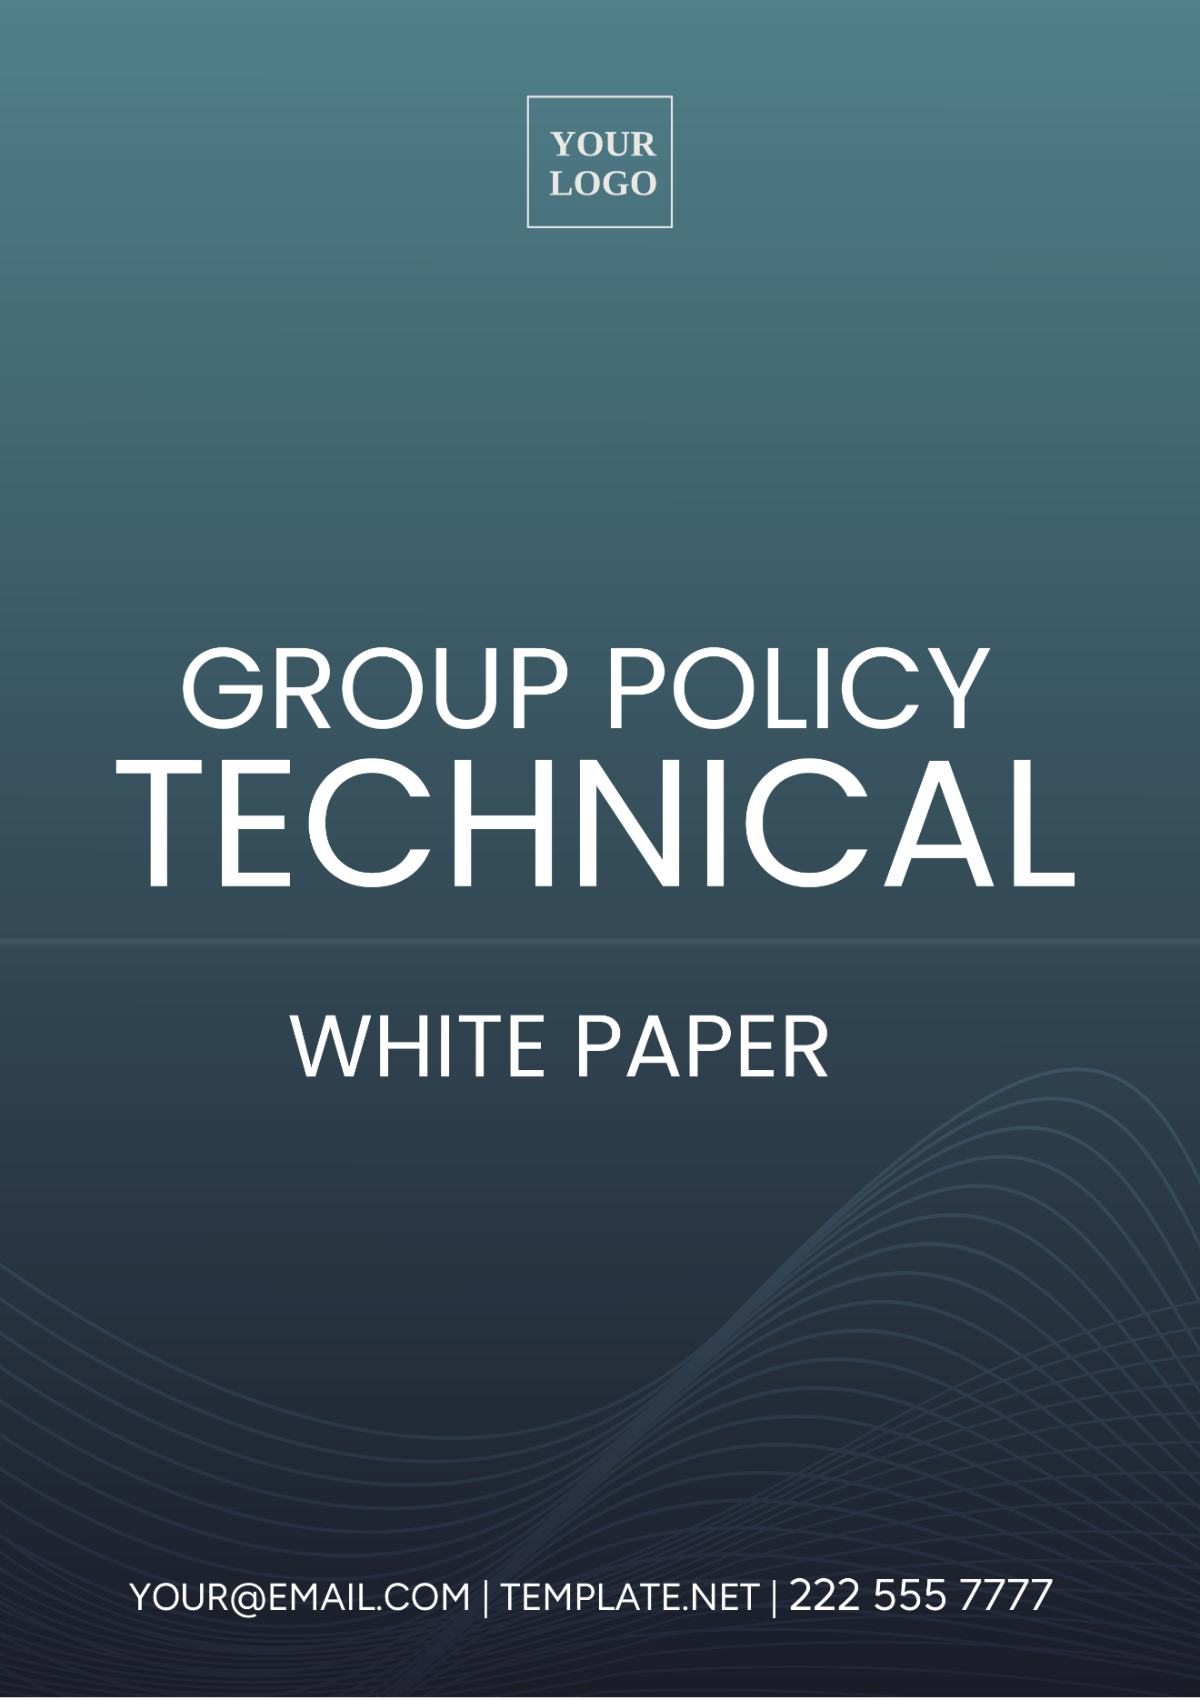 Free Group Policy Technical White Paper Template